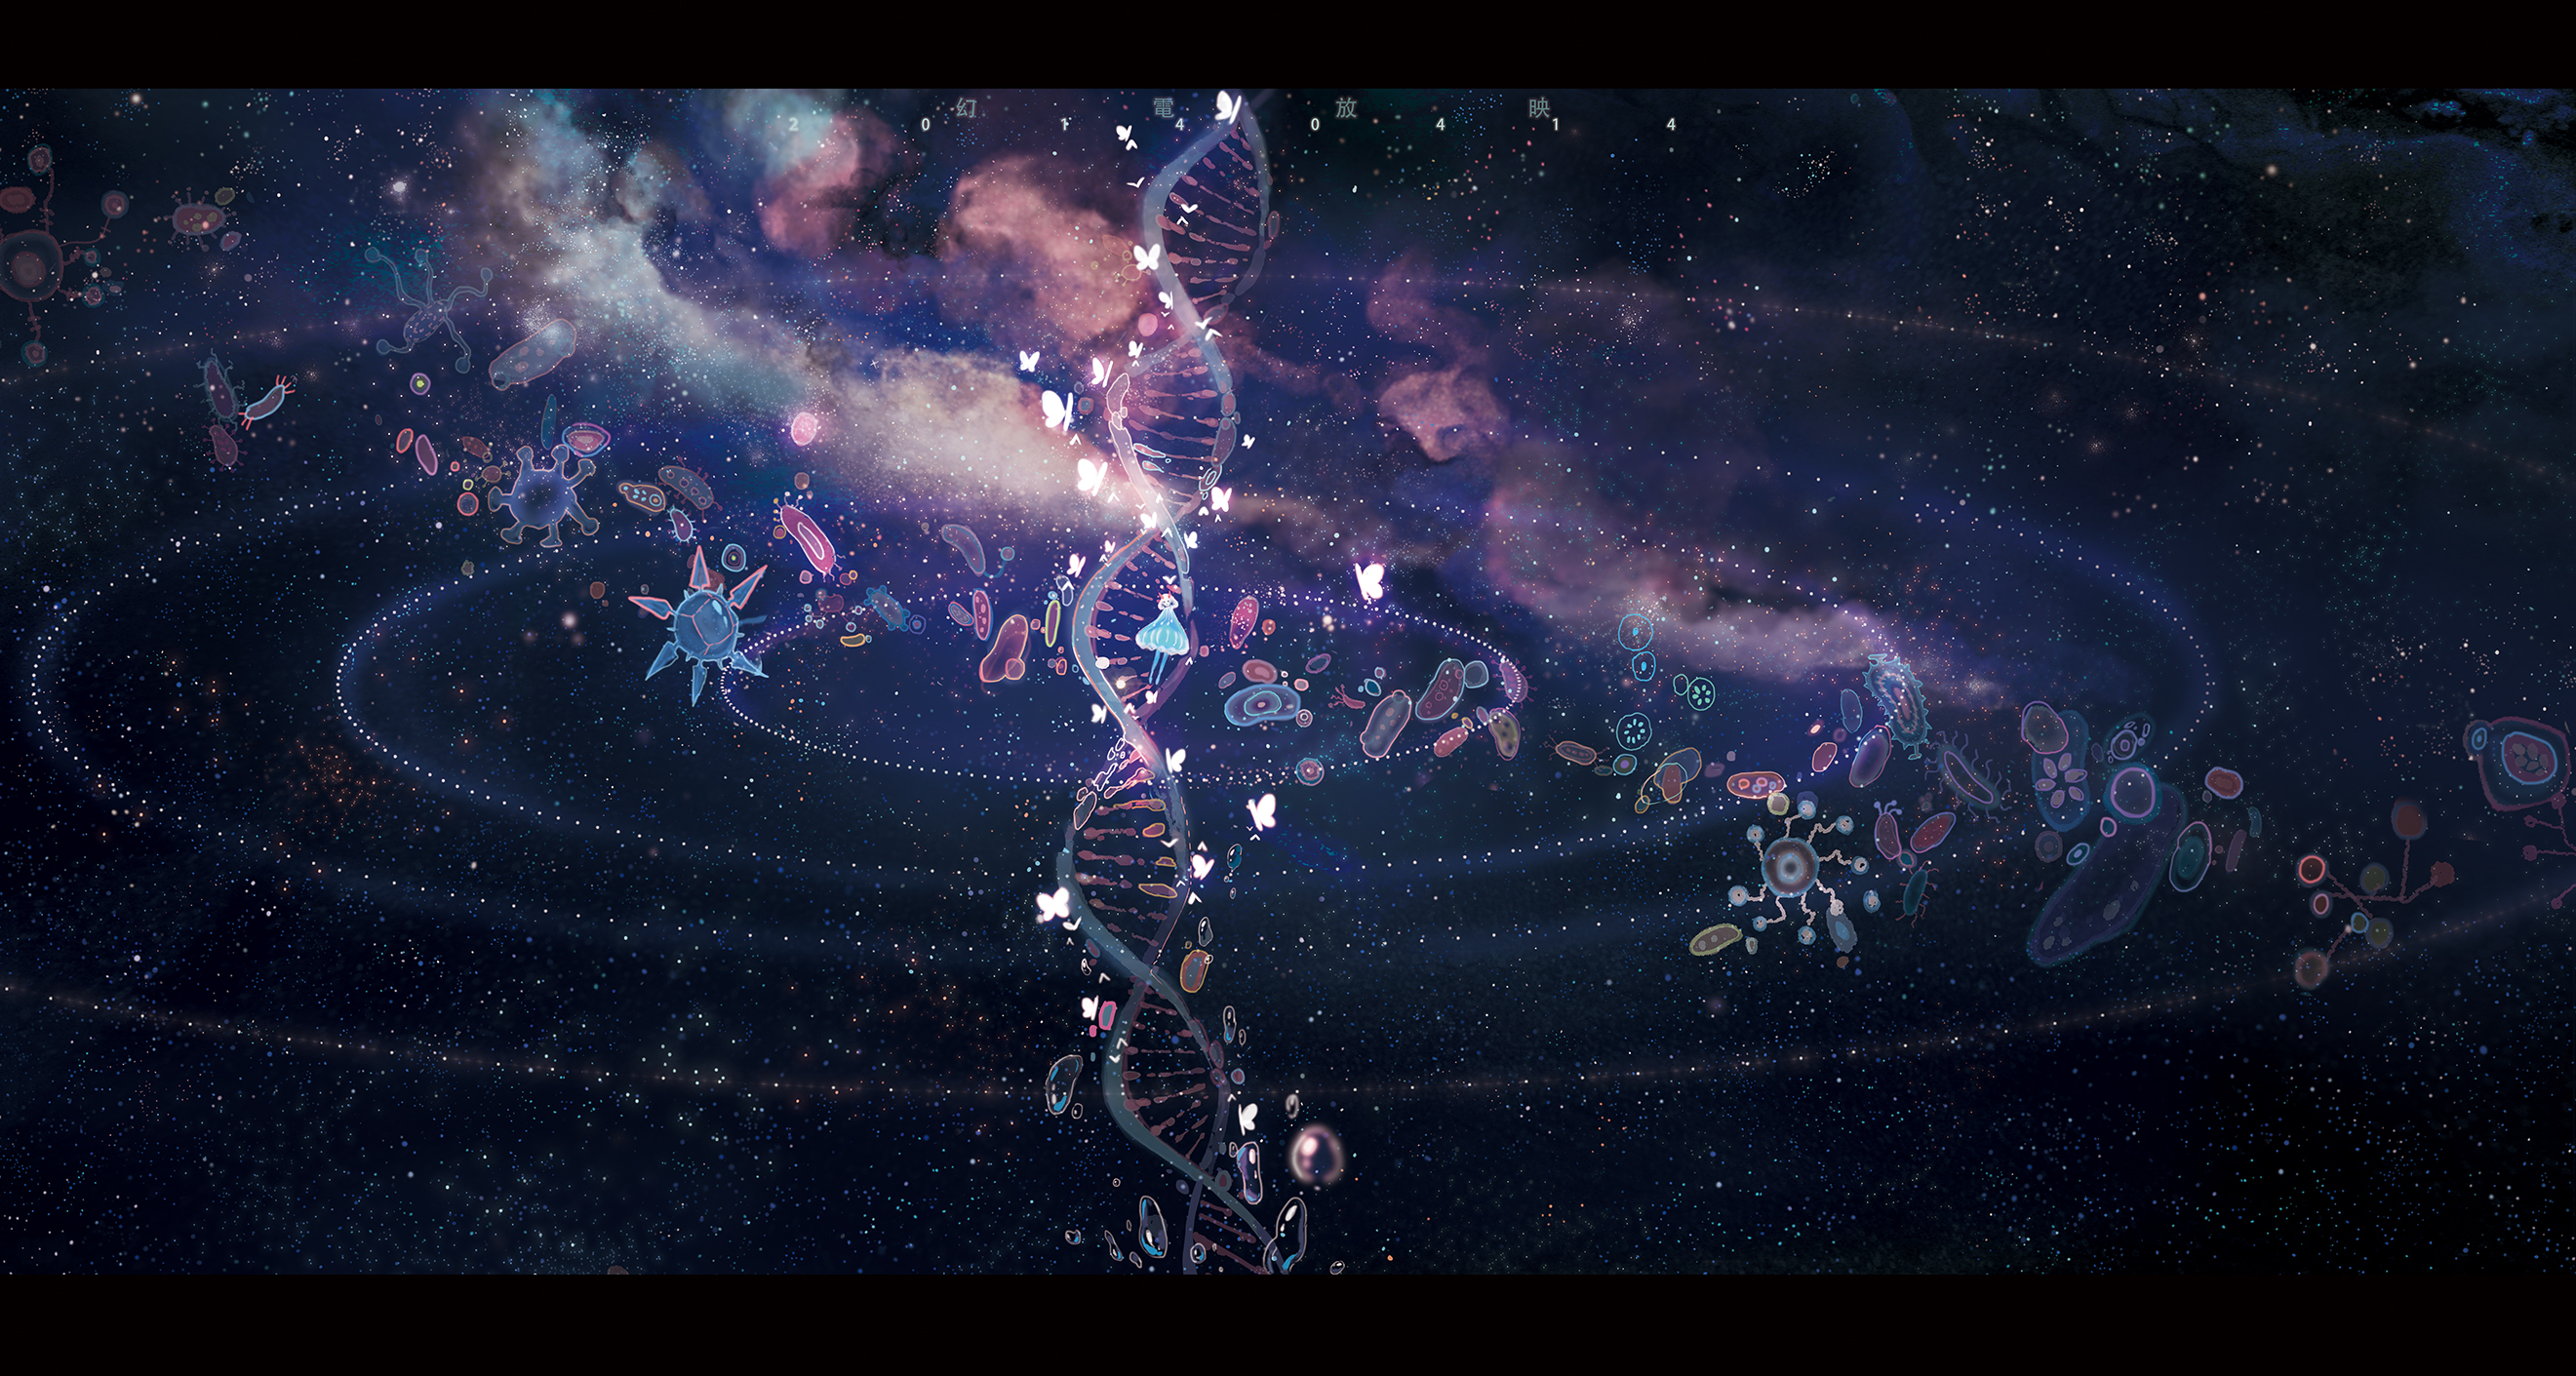 DNA string in space Wallpaper hd background - Fresh HD Wallpapers ...